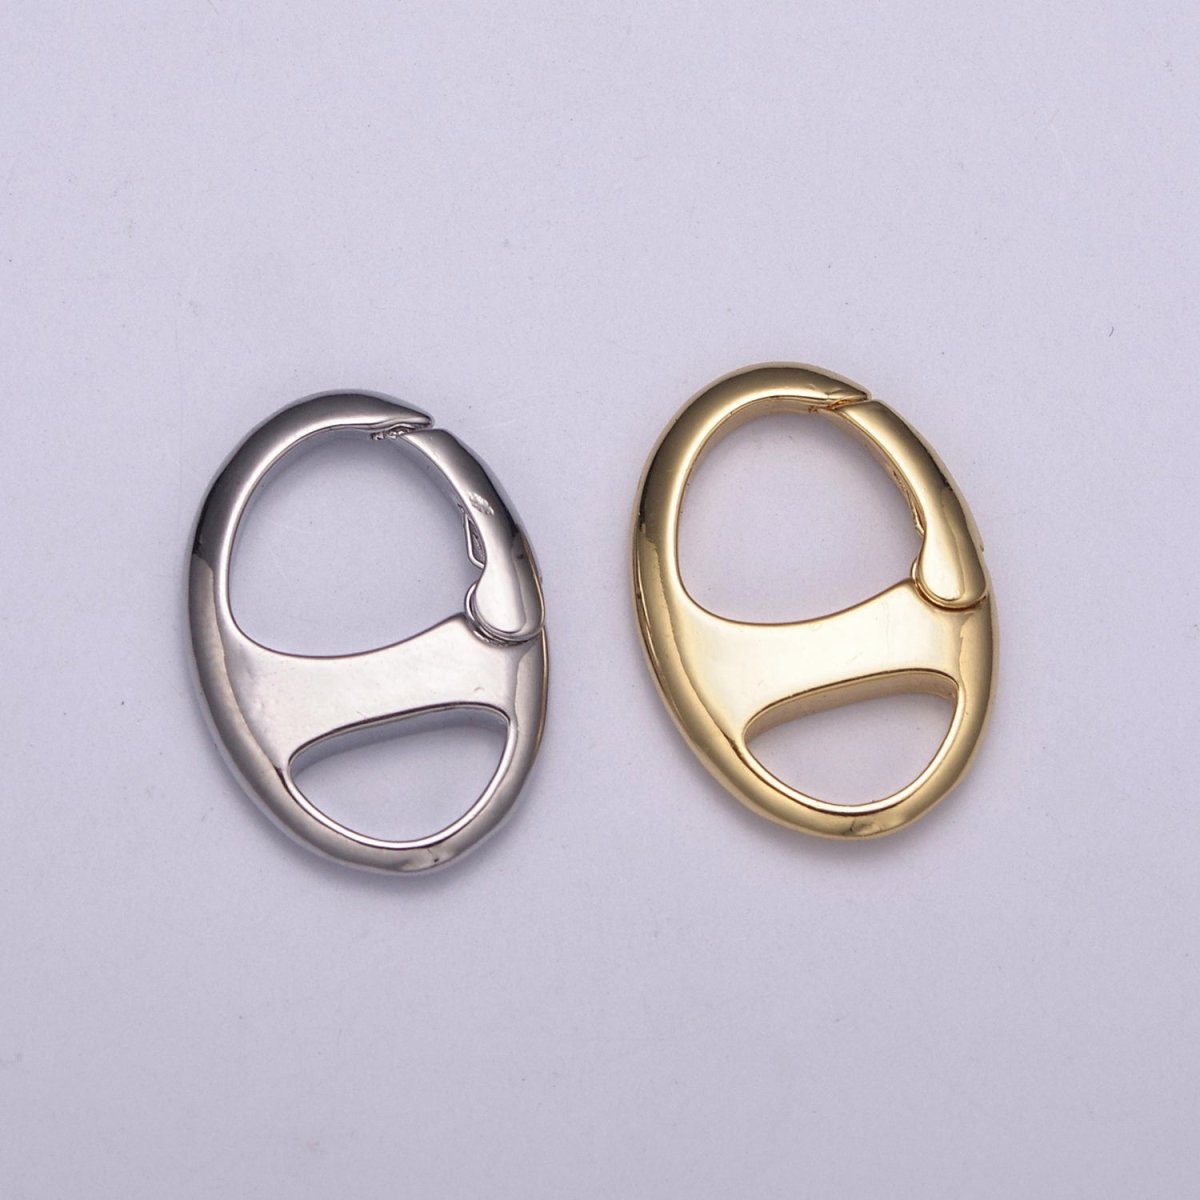 Dainty Gold Spring Gate Ring, Push Gate ring, Soda Tab Clasp 14K Gold Filled Clasp for Charm Holder Connector Clasp / Link Connector L-564 L-565 - DLUXCA